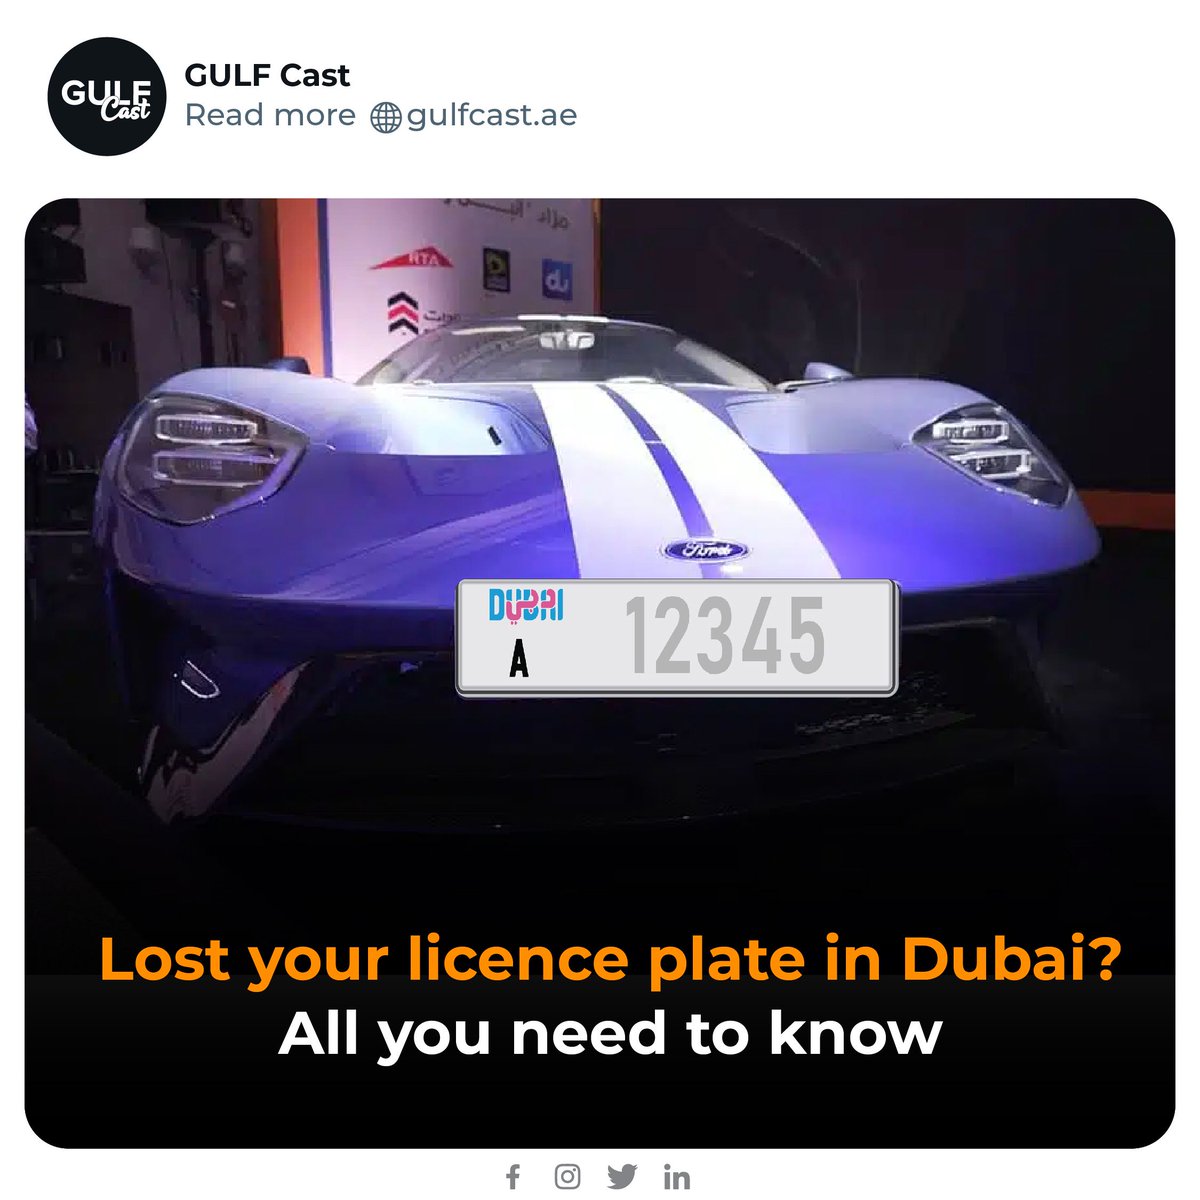 🚗 Lost your license plate? Dubai Police offers a solution to retrieve lost certificates for stolen or damaged plates.

More info: gulfcast.ae/lost-your-lice…

#gulfcast #DubaiPolice #LostLicencePlate #dubai #dubaiweather #dubairains